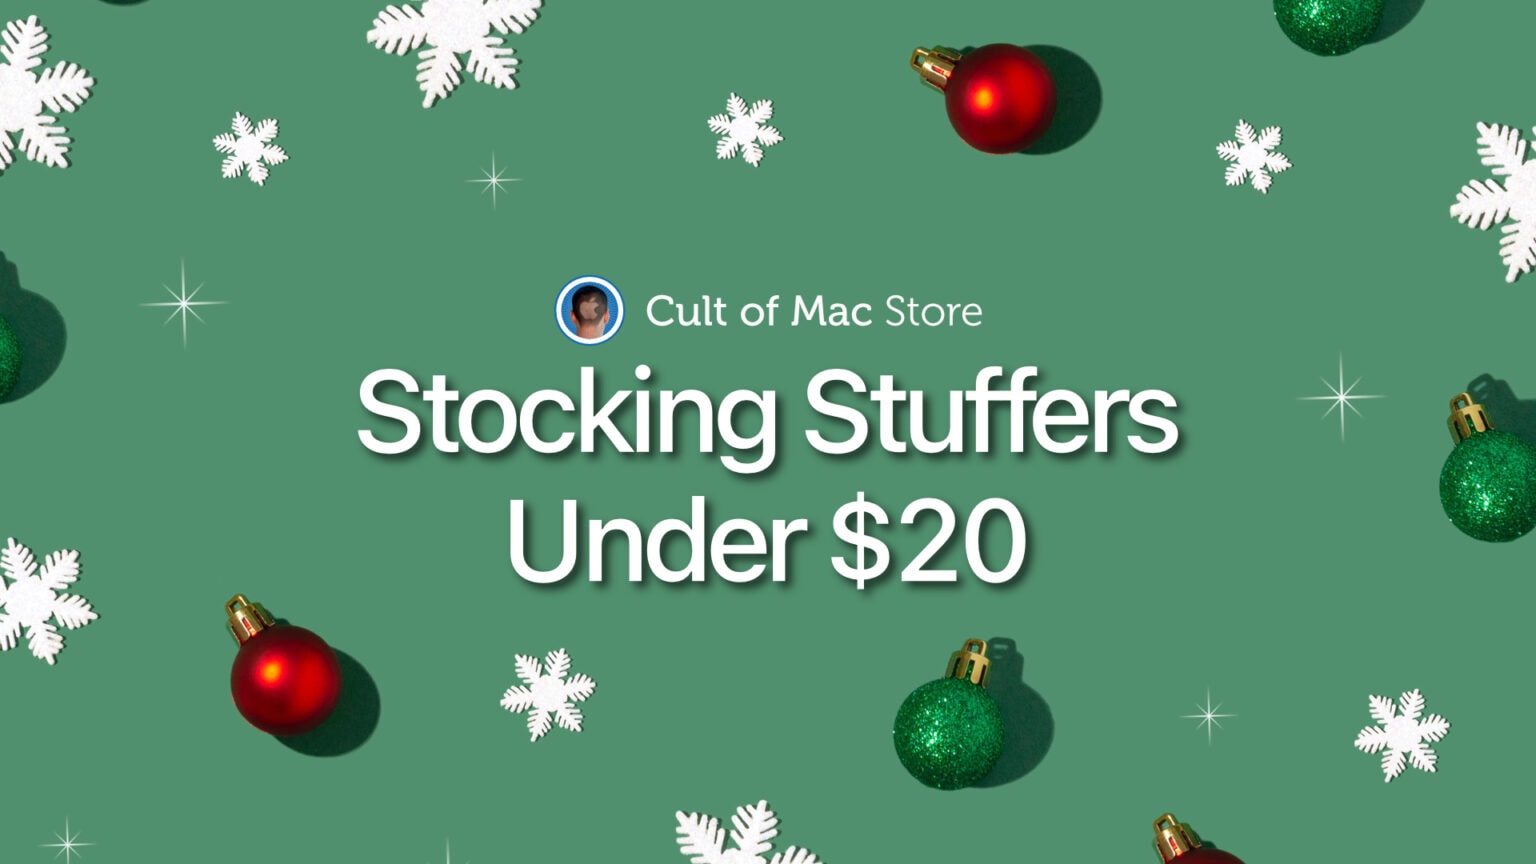 Cult of Mac Store stocking stuffers for Apple fans